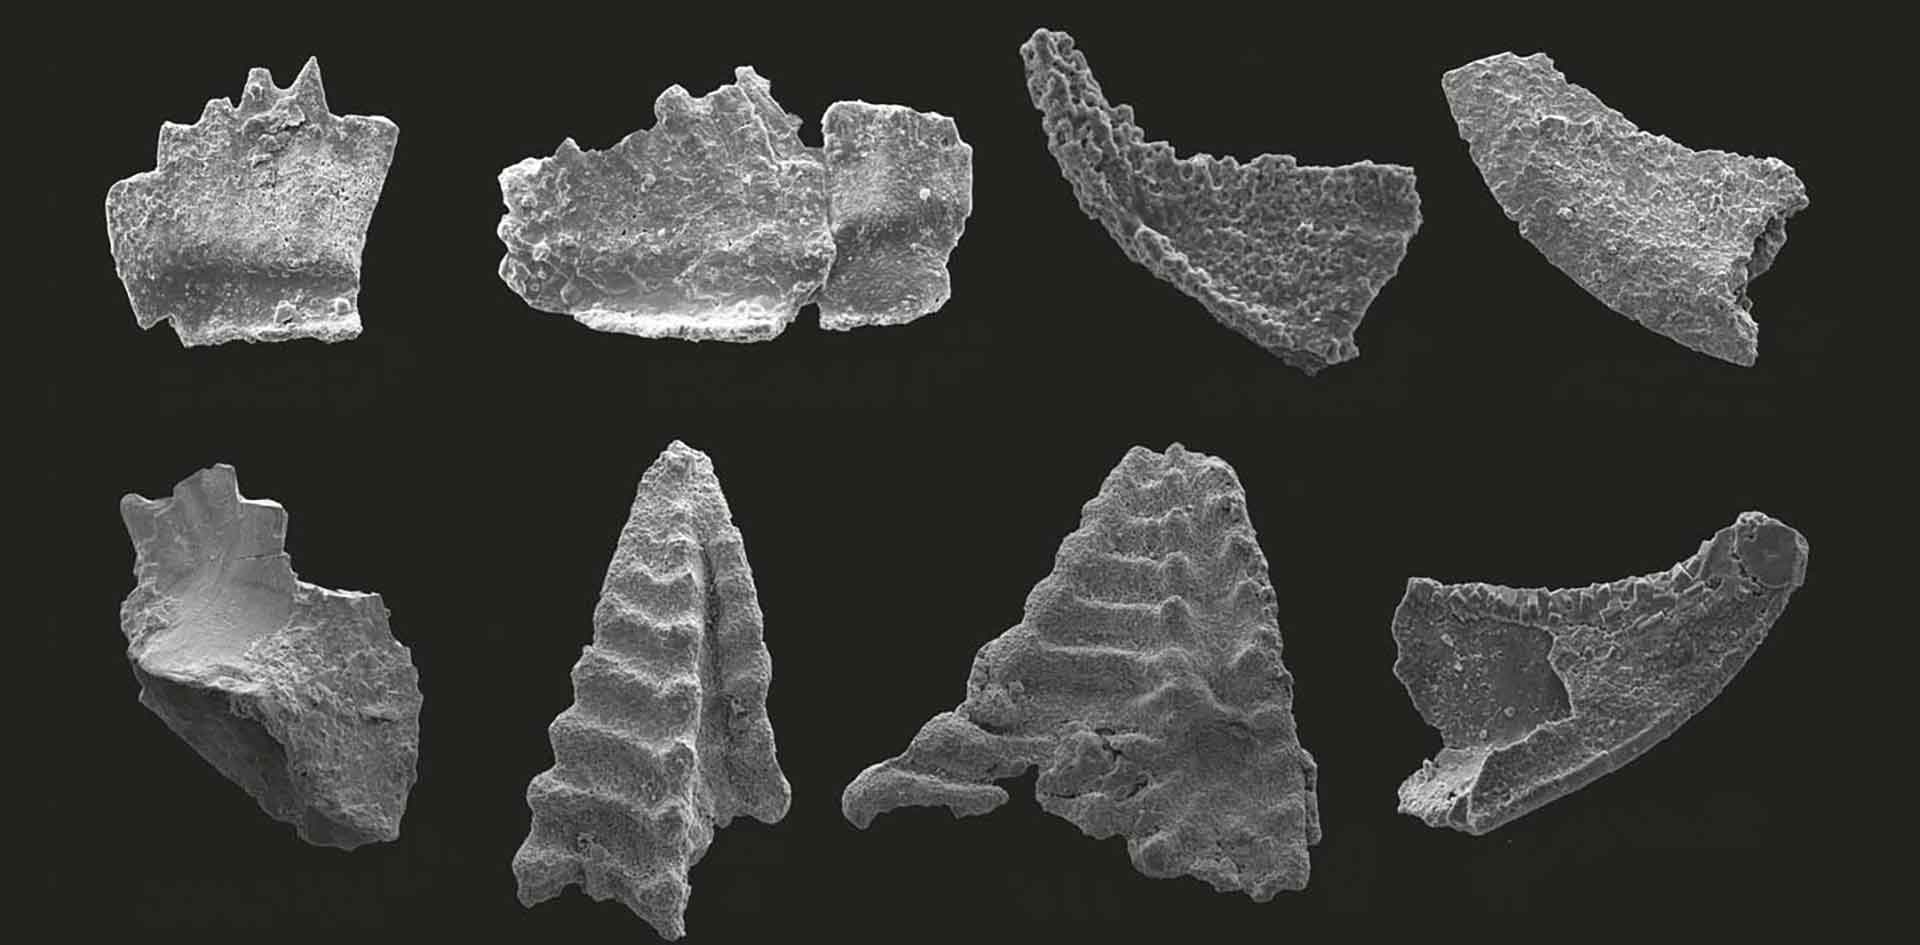 Key conodont species from the Chiatsun Group